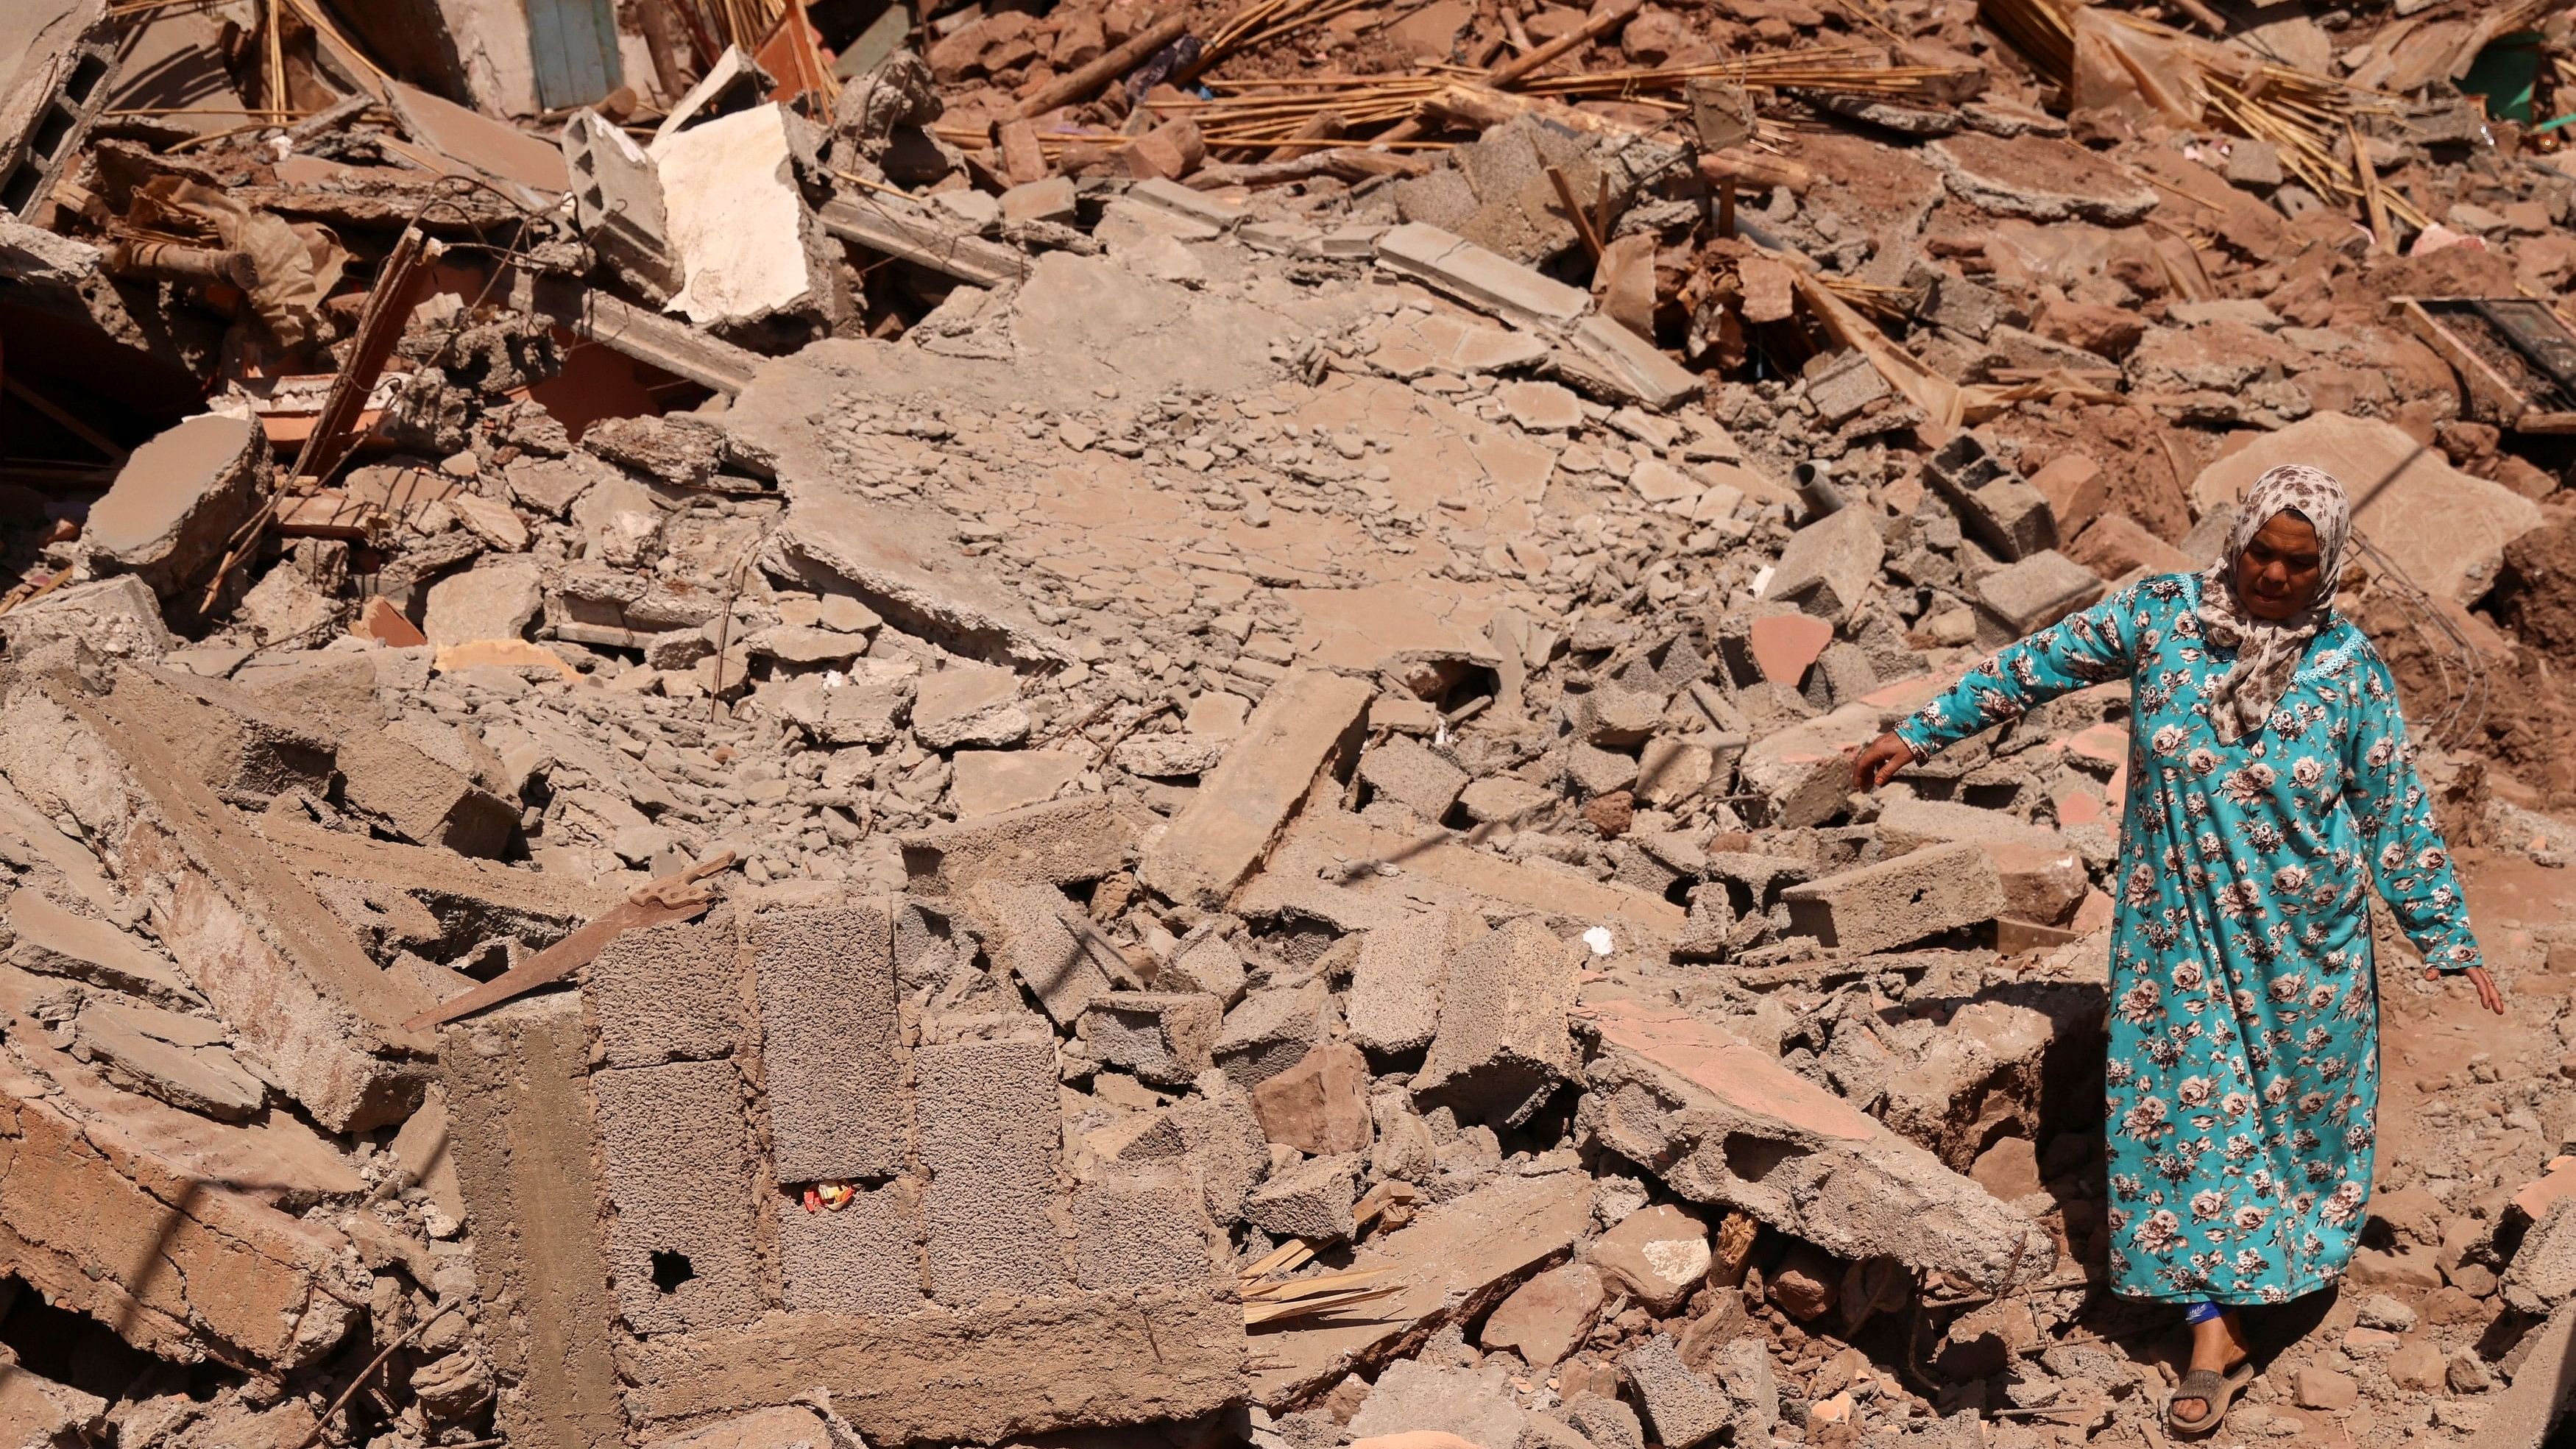 <div class="paragraphs"><p>A woman walks amid rubble in the aftermath of a deadly earthquake in Talat N'Yaaqoub, Morocco.&nbsp;</p></div>